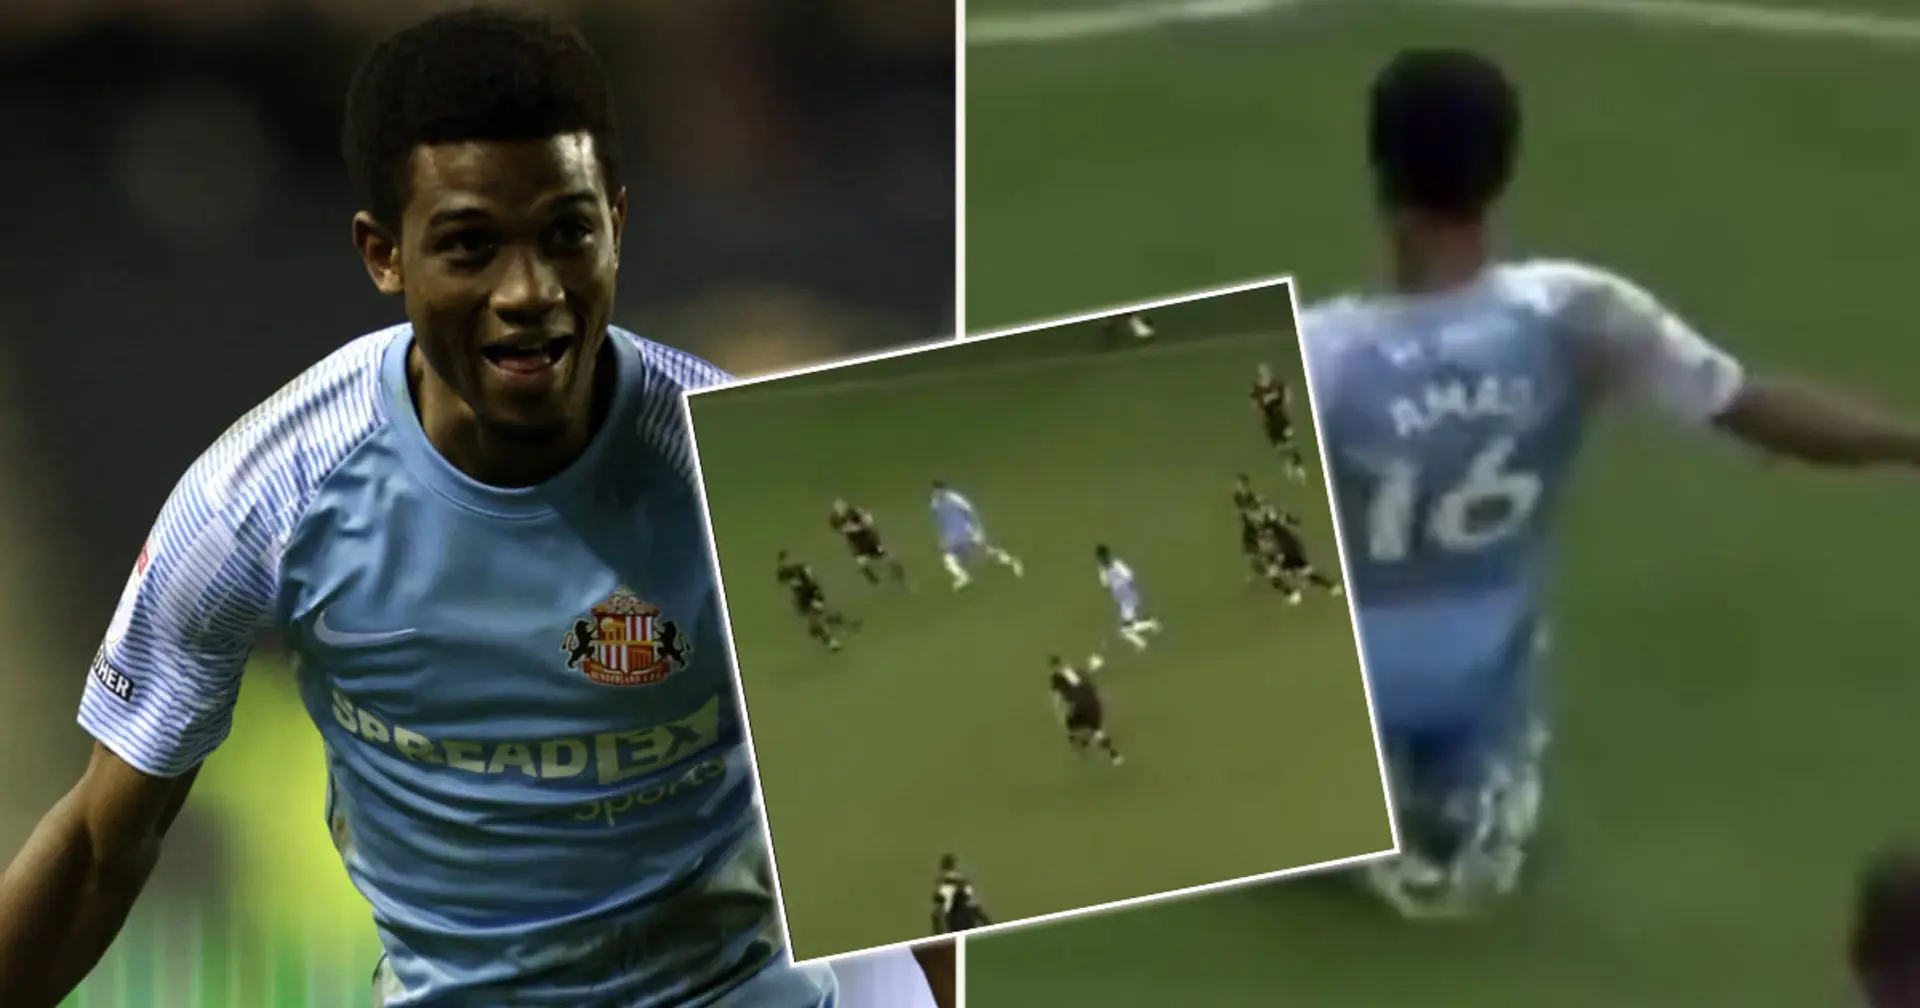 Amad Diallo scores wonder goal for Sunderland - Fabrizio Romano gives update on his future